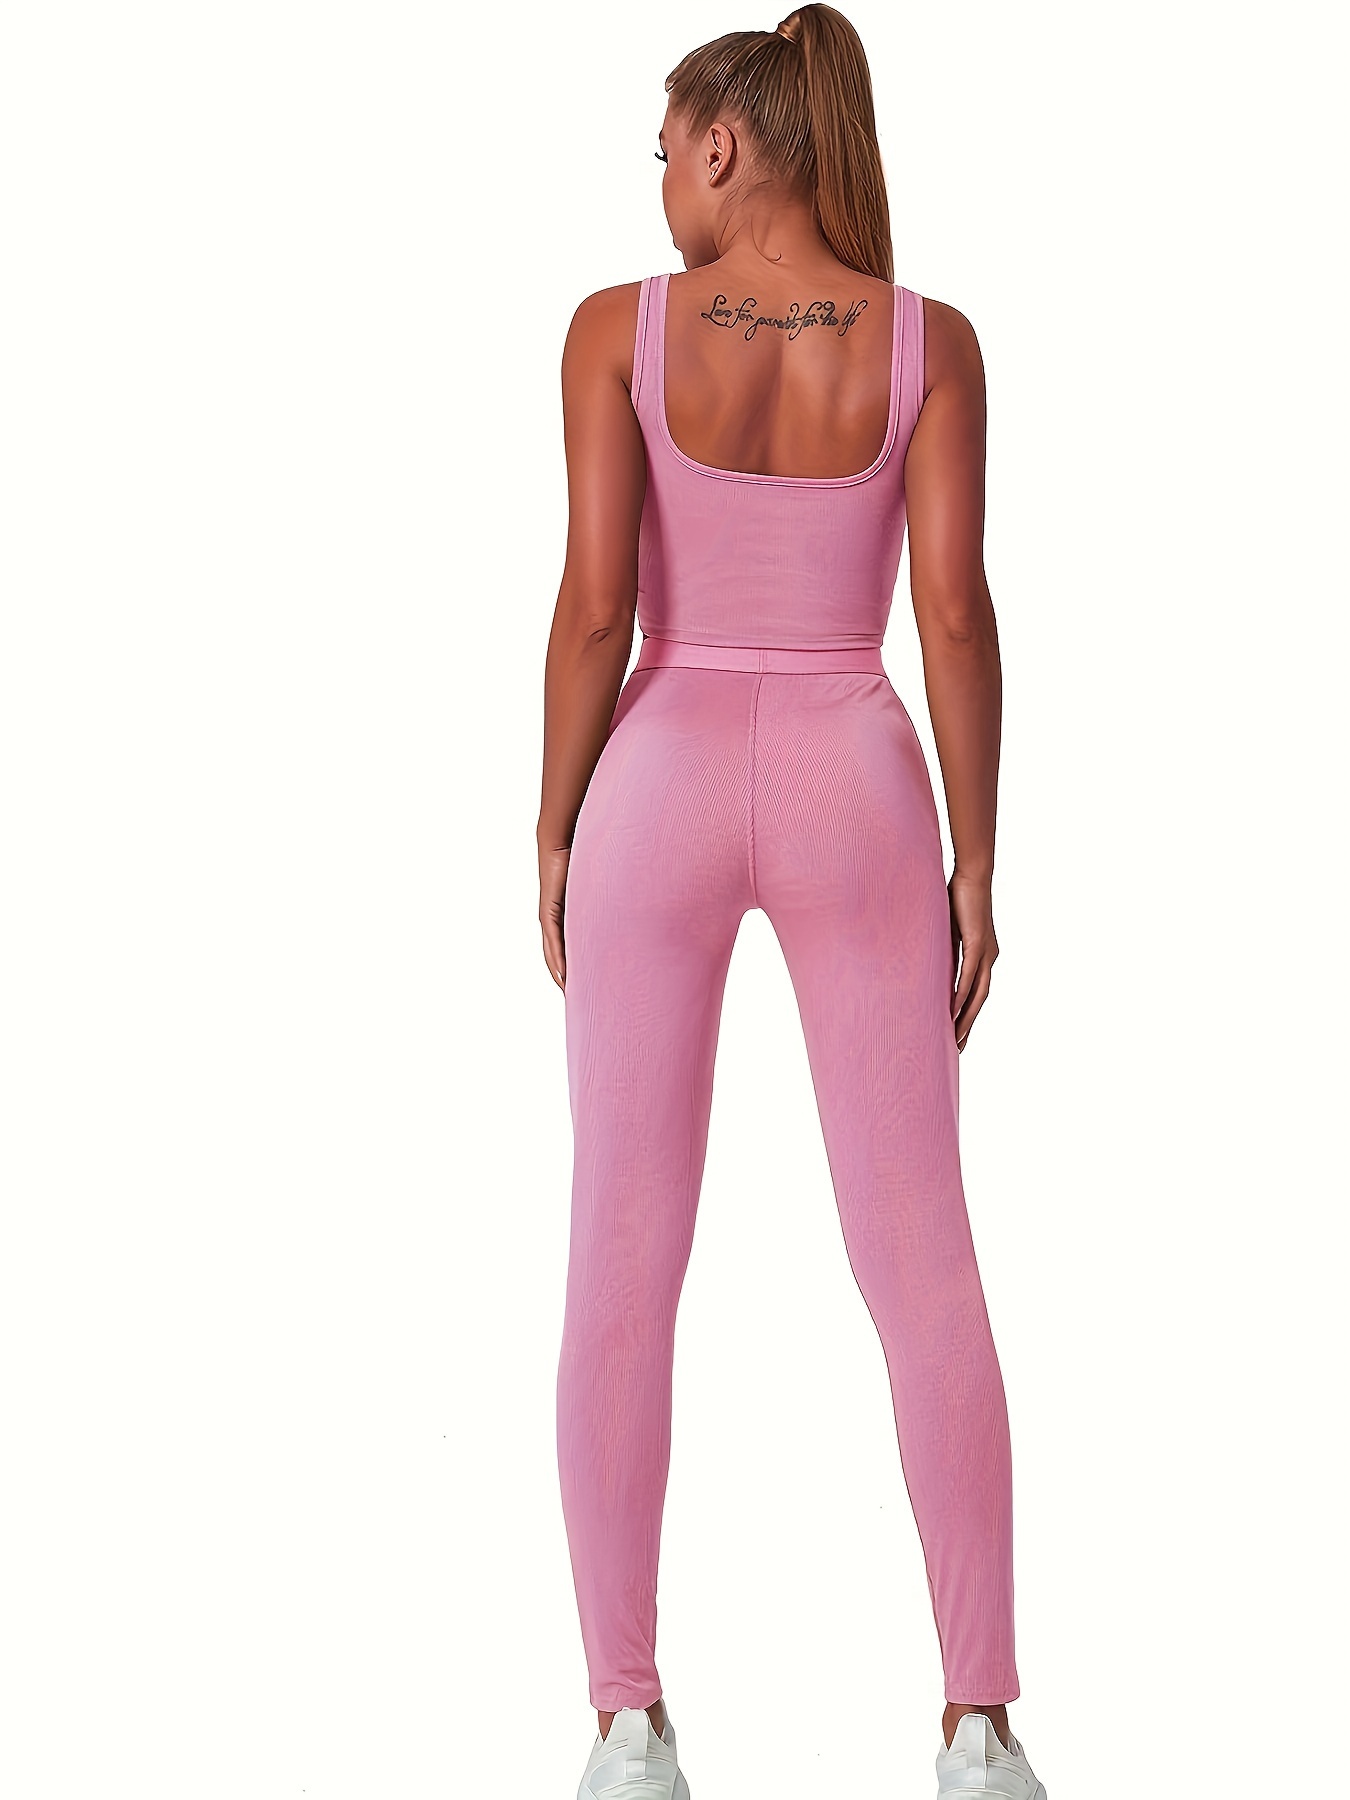 Pink Corner - Women Yoga Workout Clothes Running Sport Set Women Gym Wear  Jogging Sports Bra Shorts Size and Colors Available Rs 2550.00